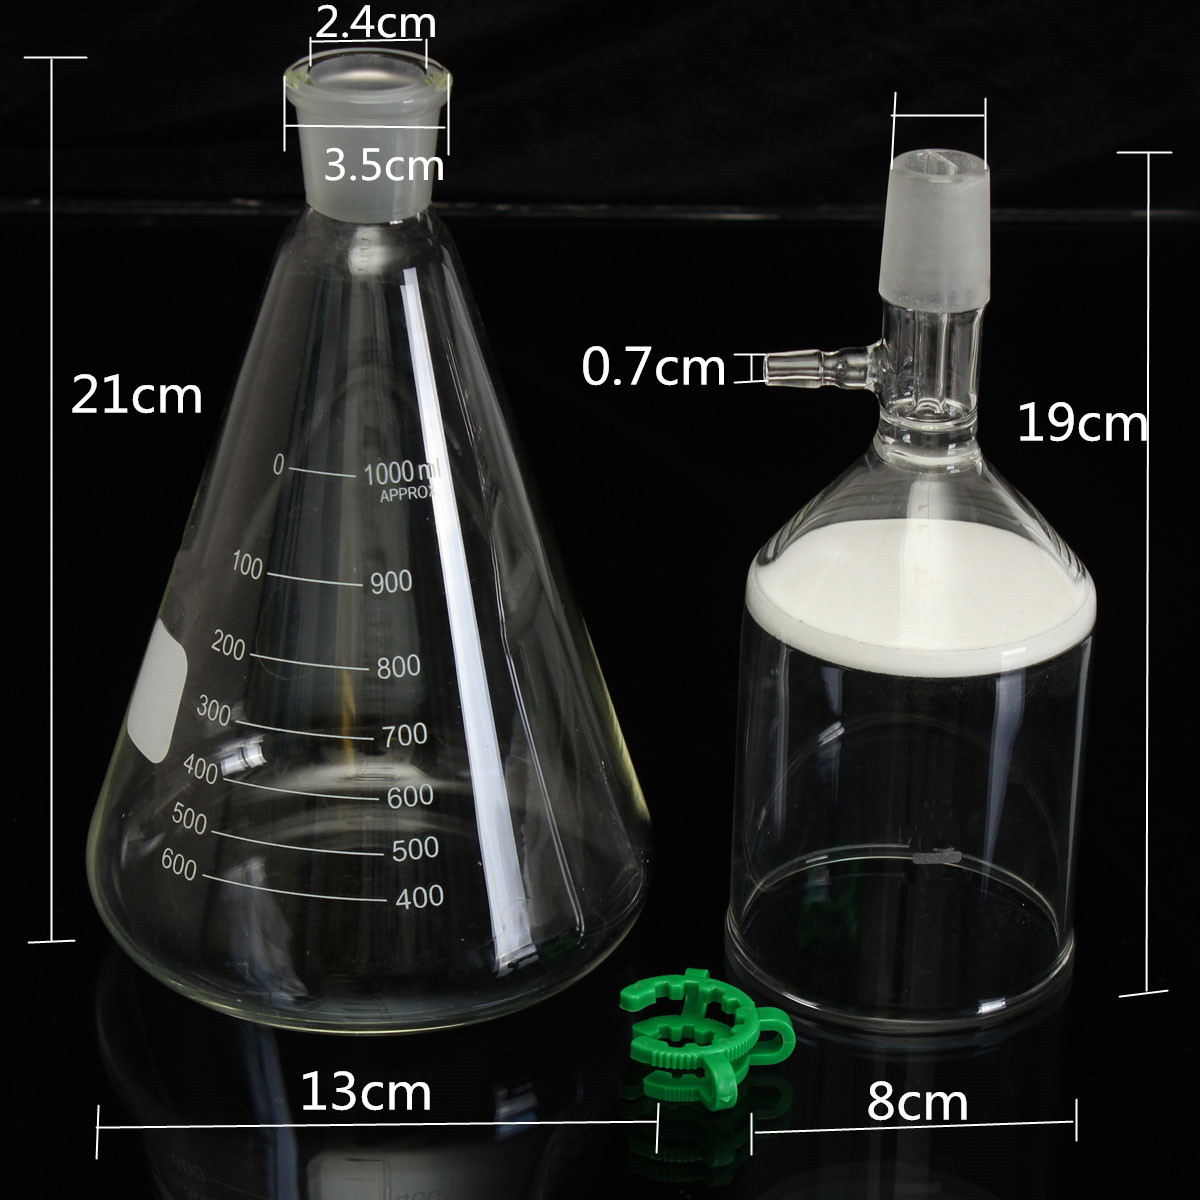 Glass-Vaccum-Suction-Filter-Filtration-Kit-250ml-Buchner-Funnel-1000mL-Conical-Flask-992081-2